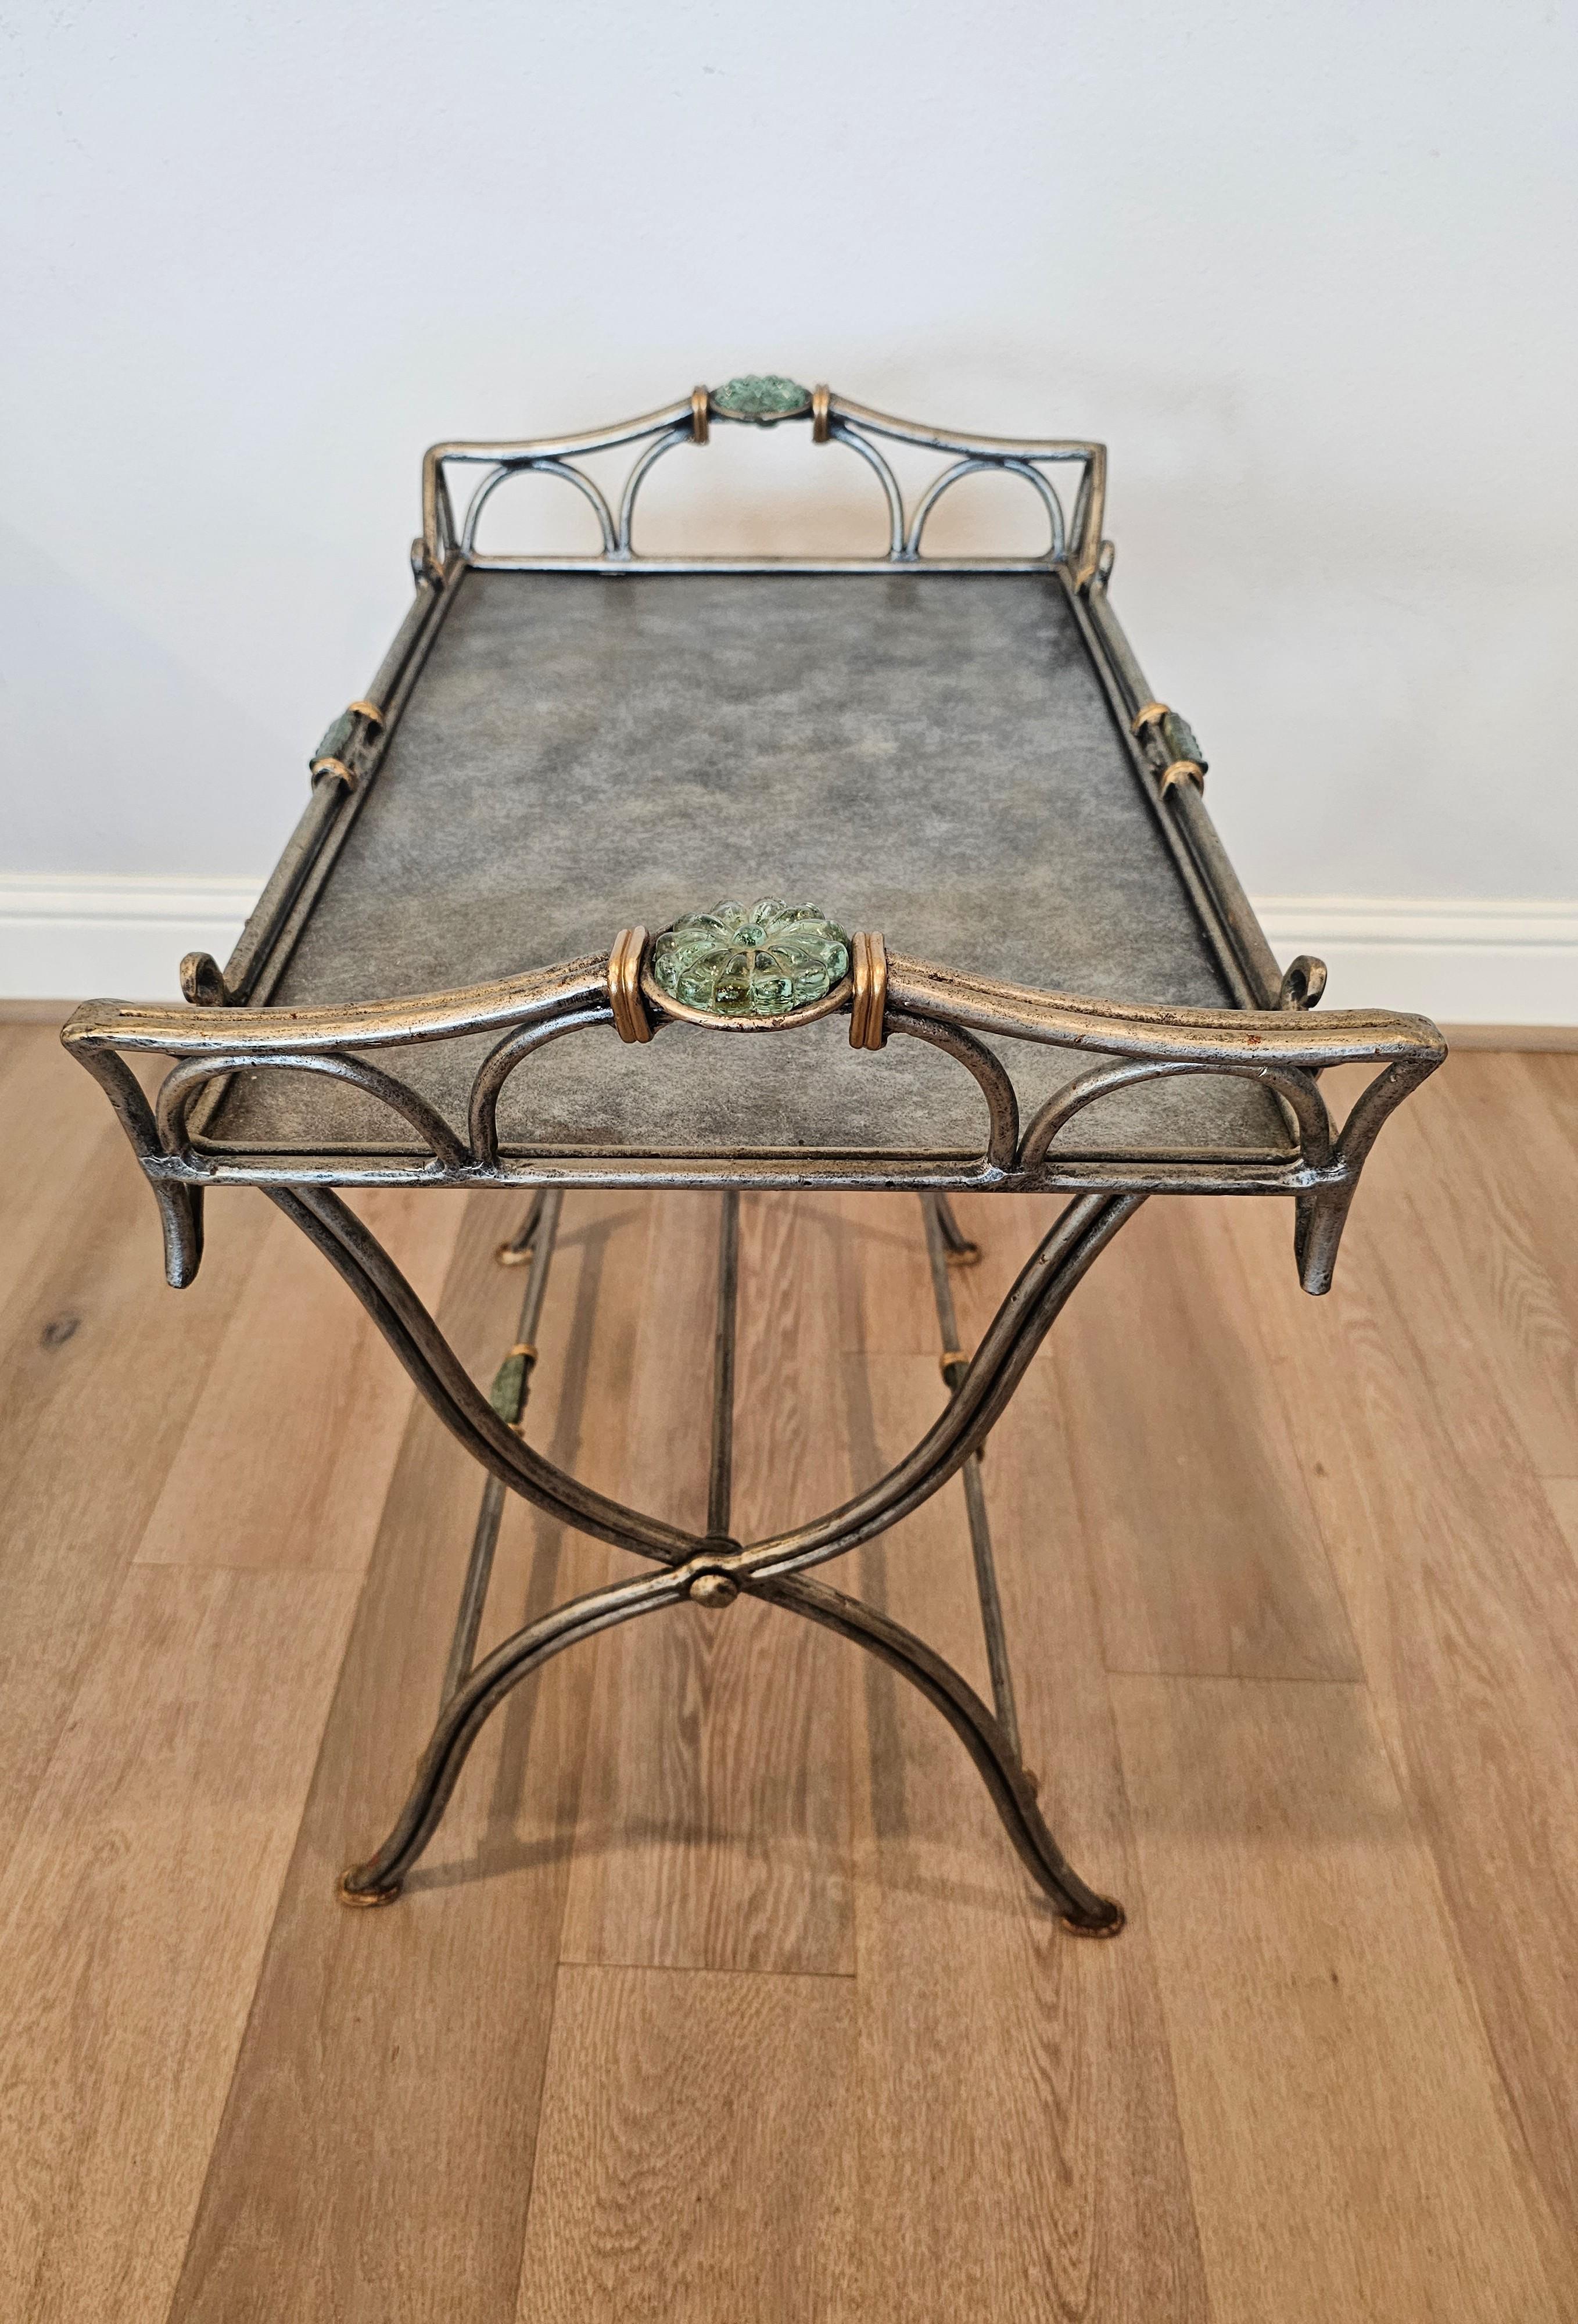 Sculptural Silver-tone Metal Folding Tray Top Service Table  In Good Condition For Sale In Forney, TX